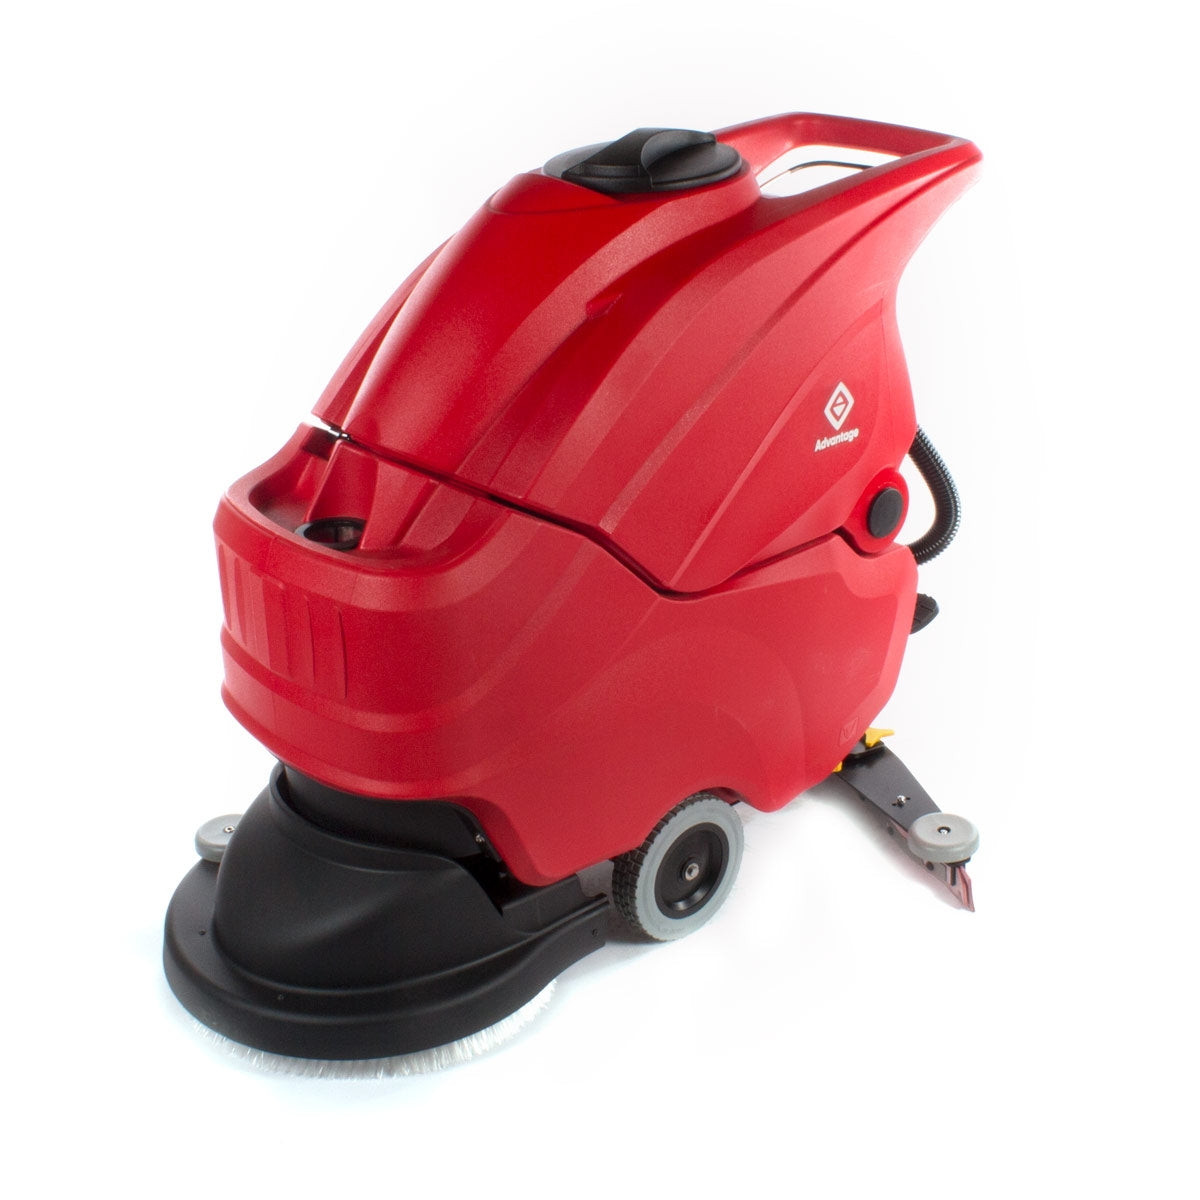 Handheld Power Scrubber with 4 Replaceable Brush Heads $50.99